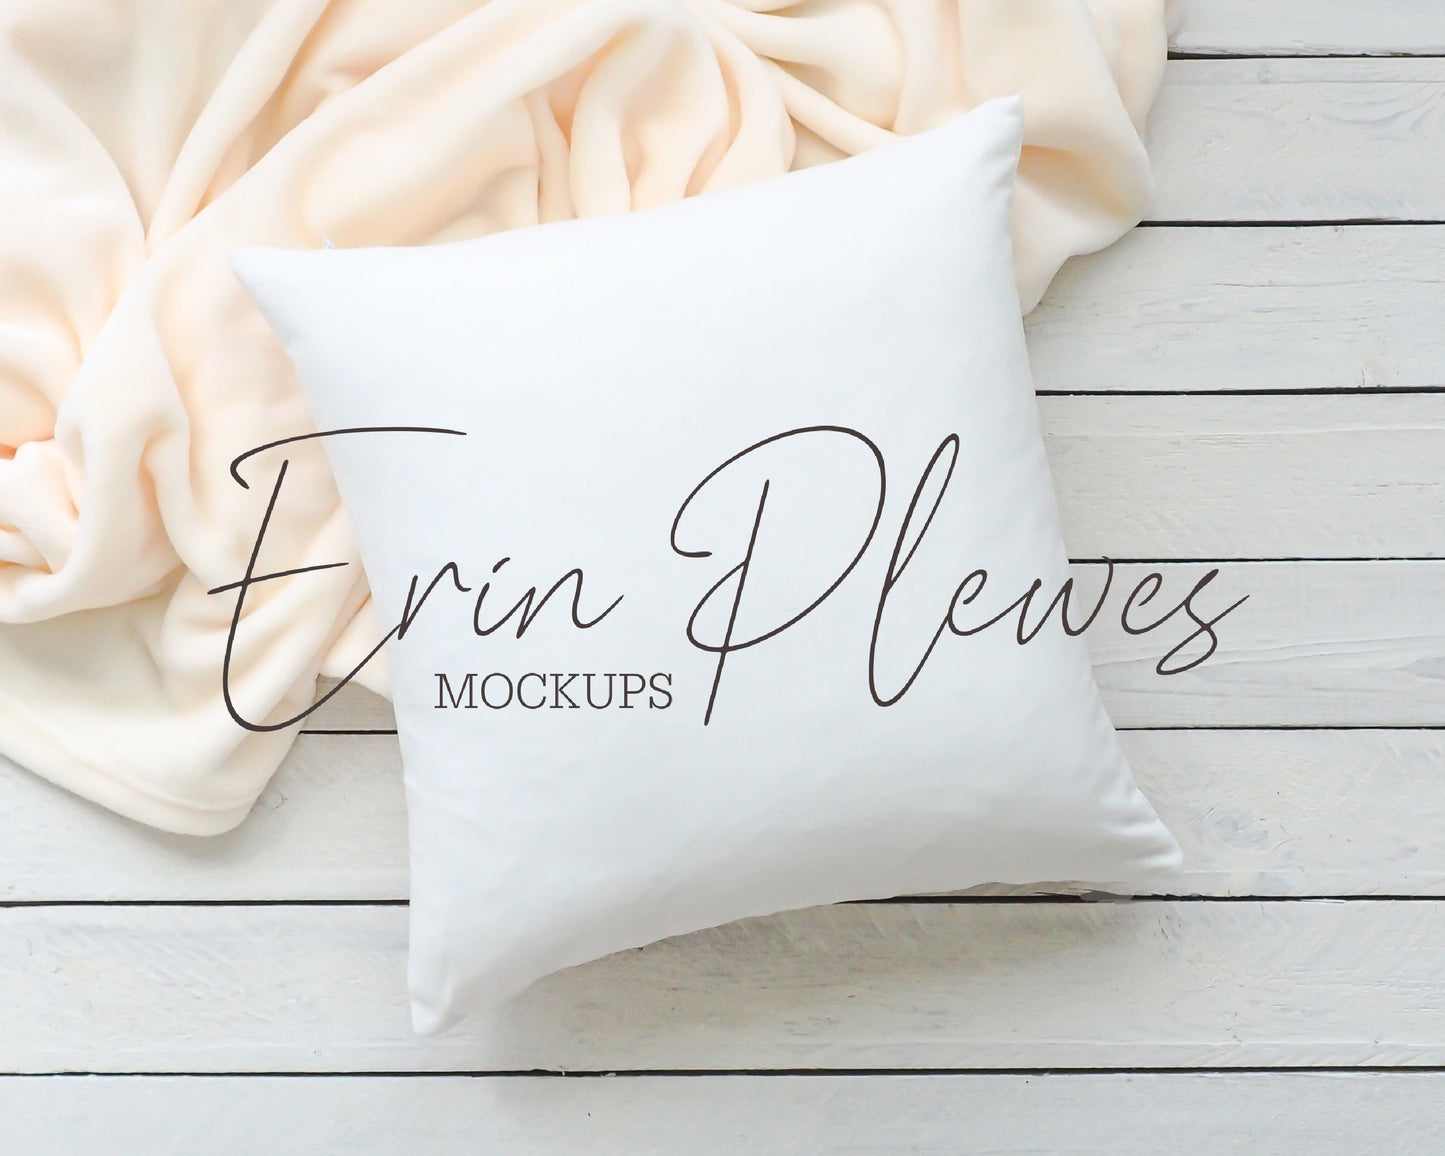 Cushion Mock Up PSD Smart Object, Pillow Mockup with Cream Blanket, Pillow Slipcover Mock-up, Instant Digital Download Jpeg Template